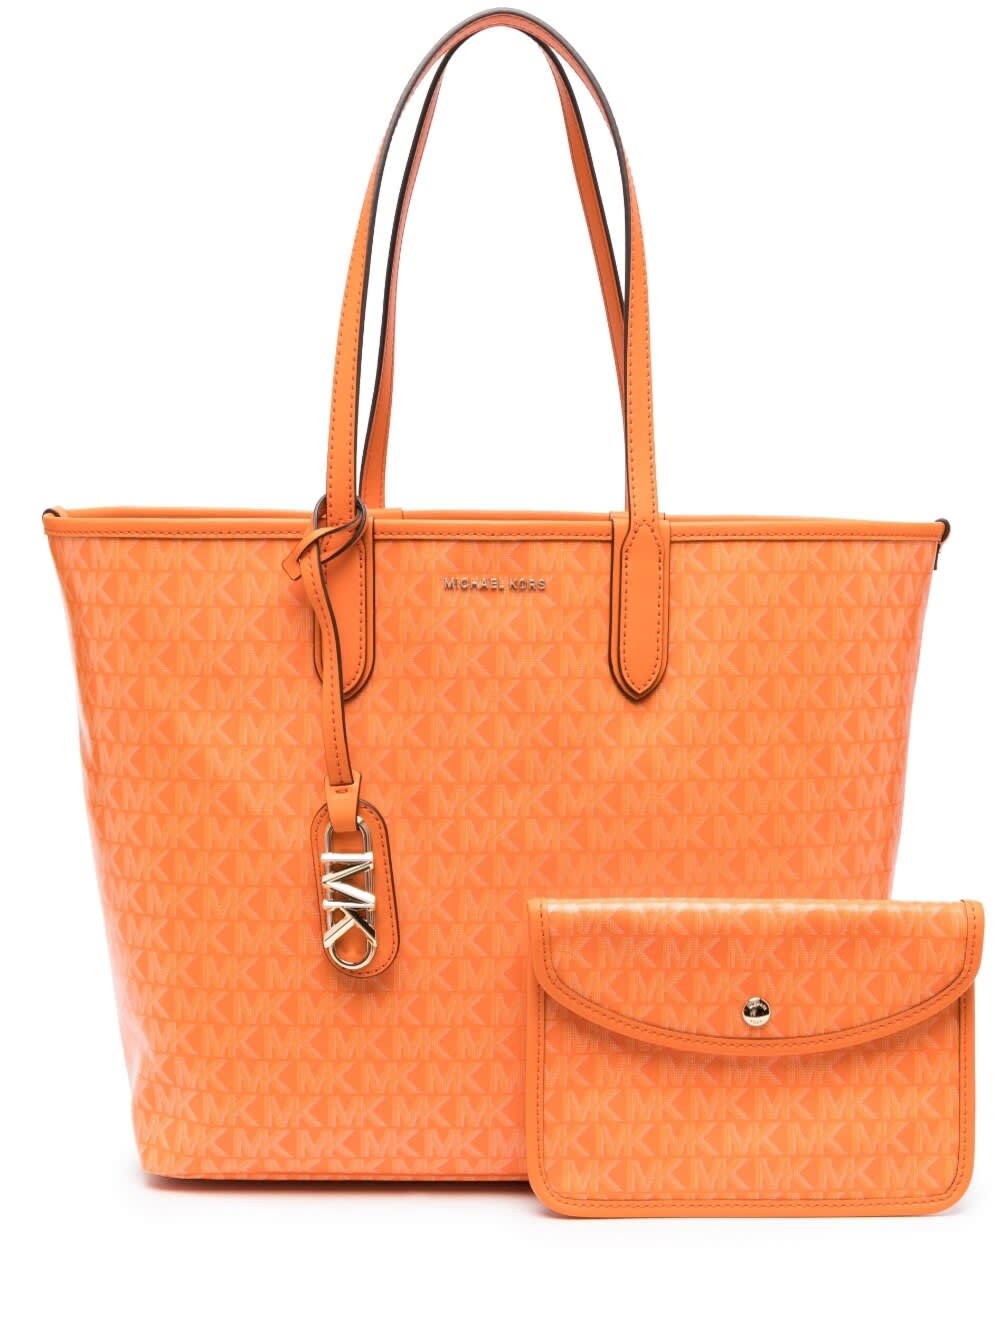 MICHAEL MICHAEL KORS BIG ORANGE TOTE BAG WITH ALL-OVER MONOGRAM AND LOGO CHARM IN FAUX LEATHER WOMAN